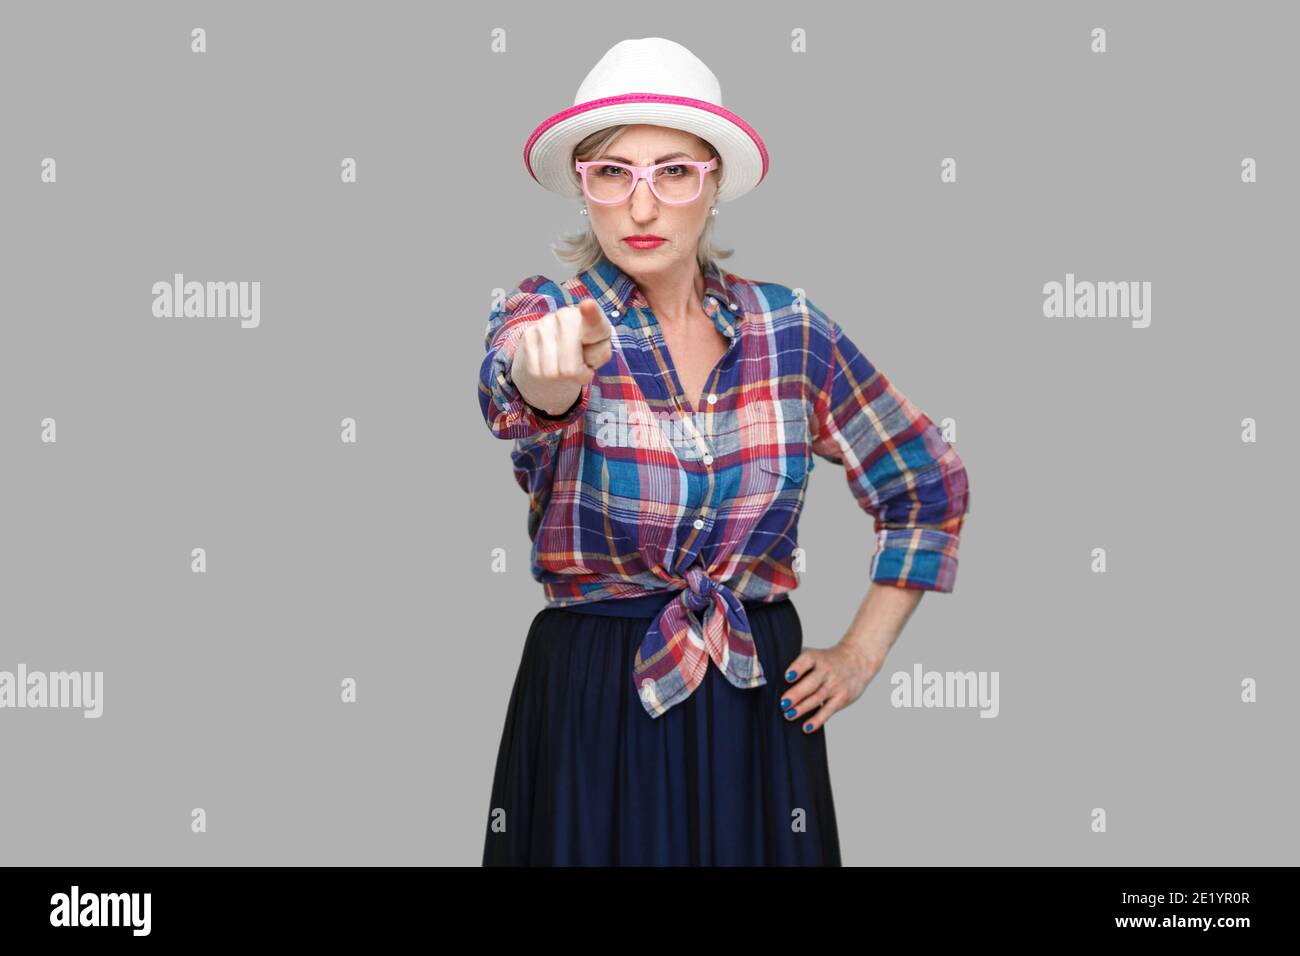 Hey you. Portrait of serious bossy modern stylish mature woman in casual style with hat and eyeglasses standing, pointing and looking at camera. indoo Stock Photo